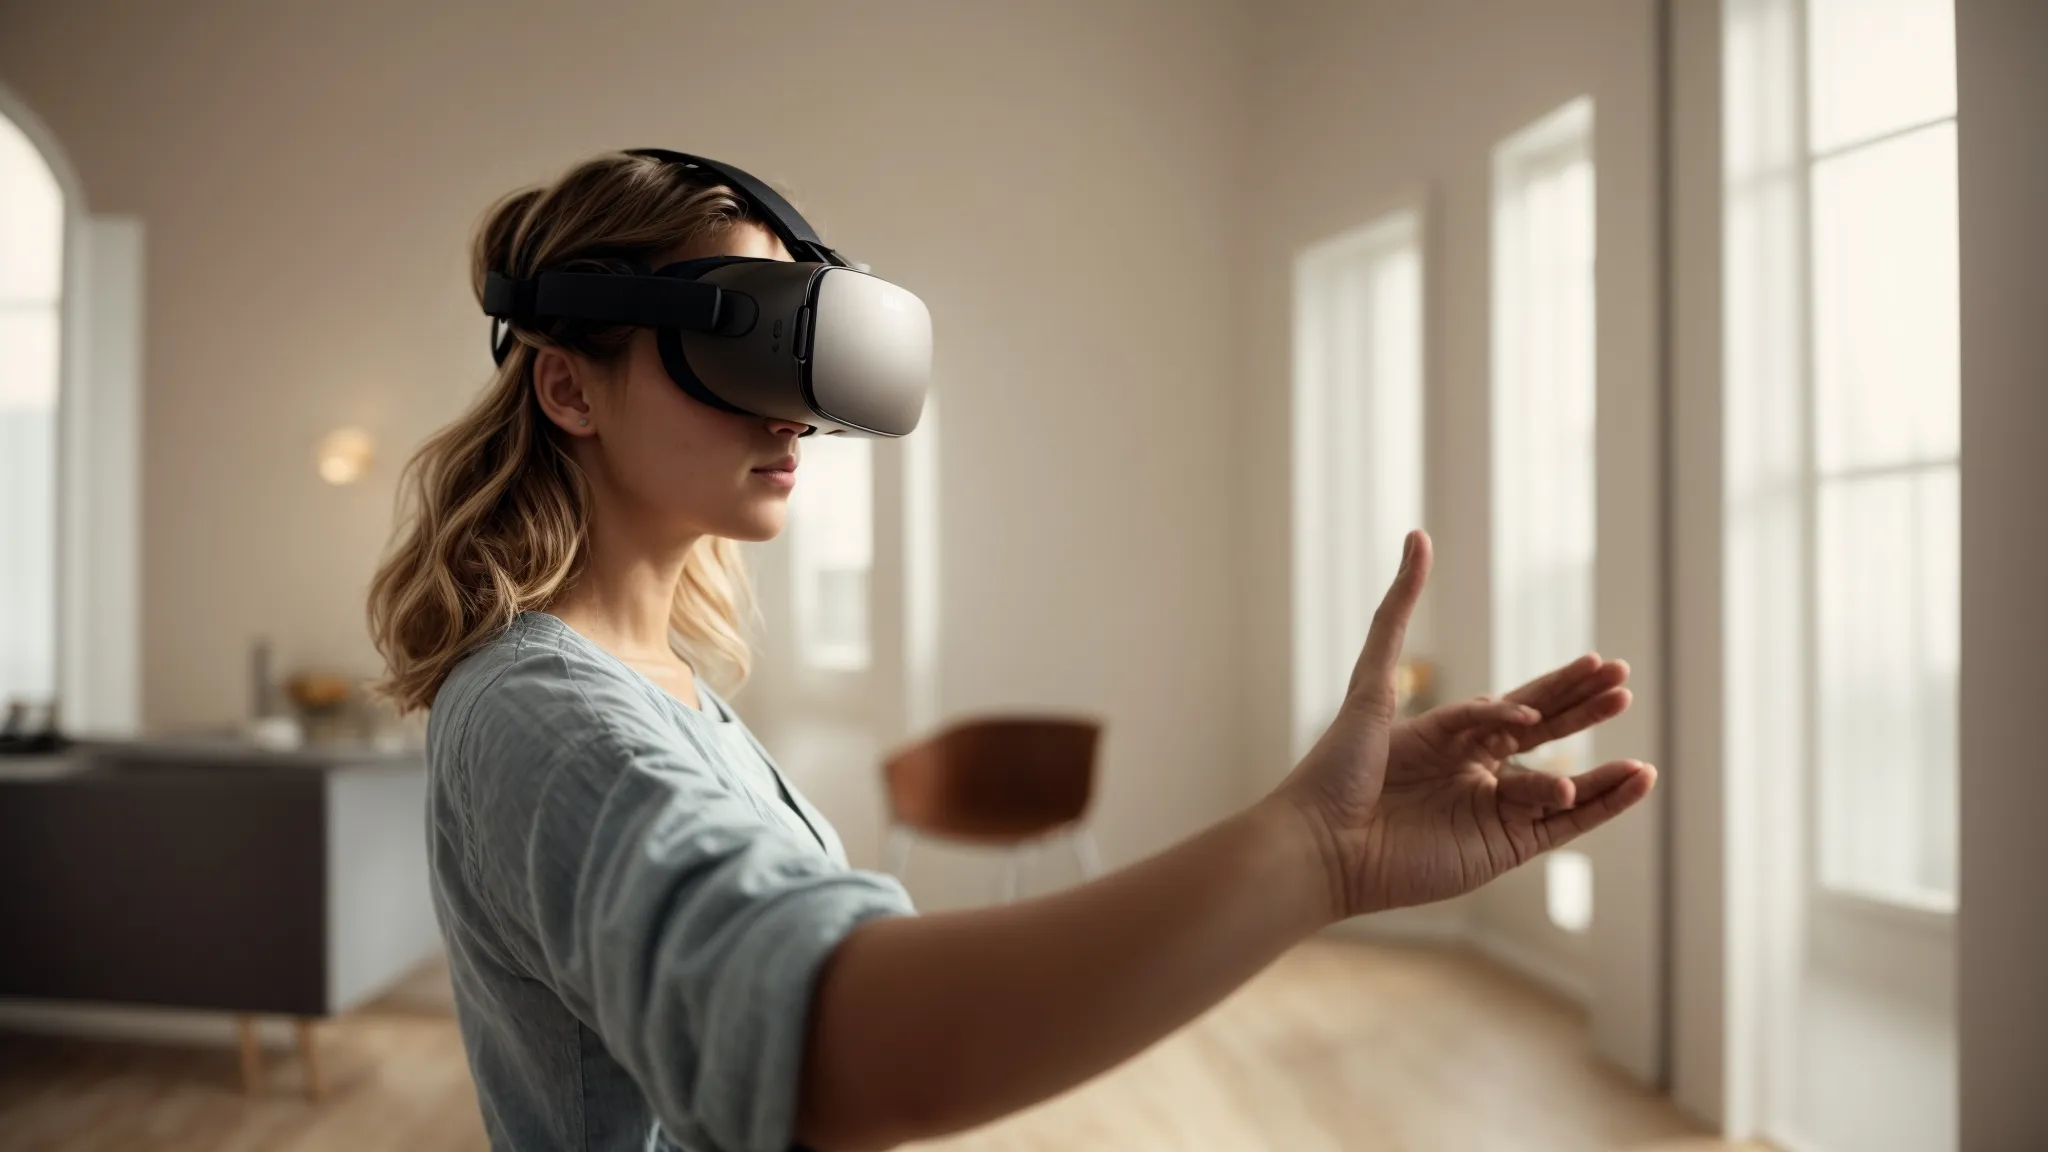 a person wearing a virtual reality headset, reaching out towards an invisible object with fascination in a brightly lit room.